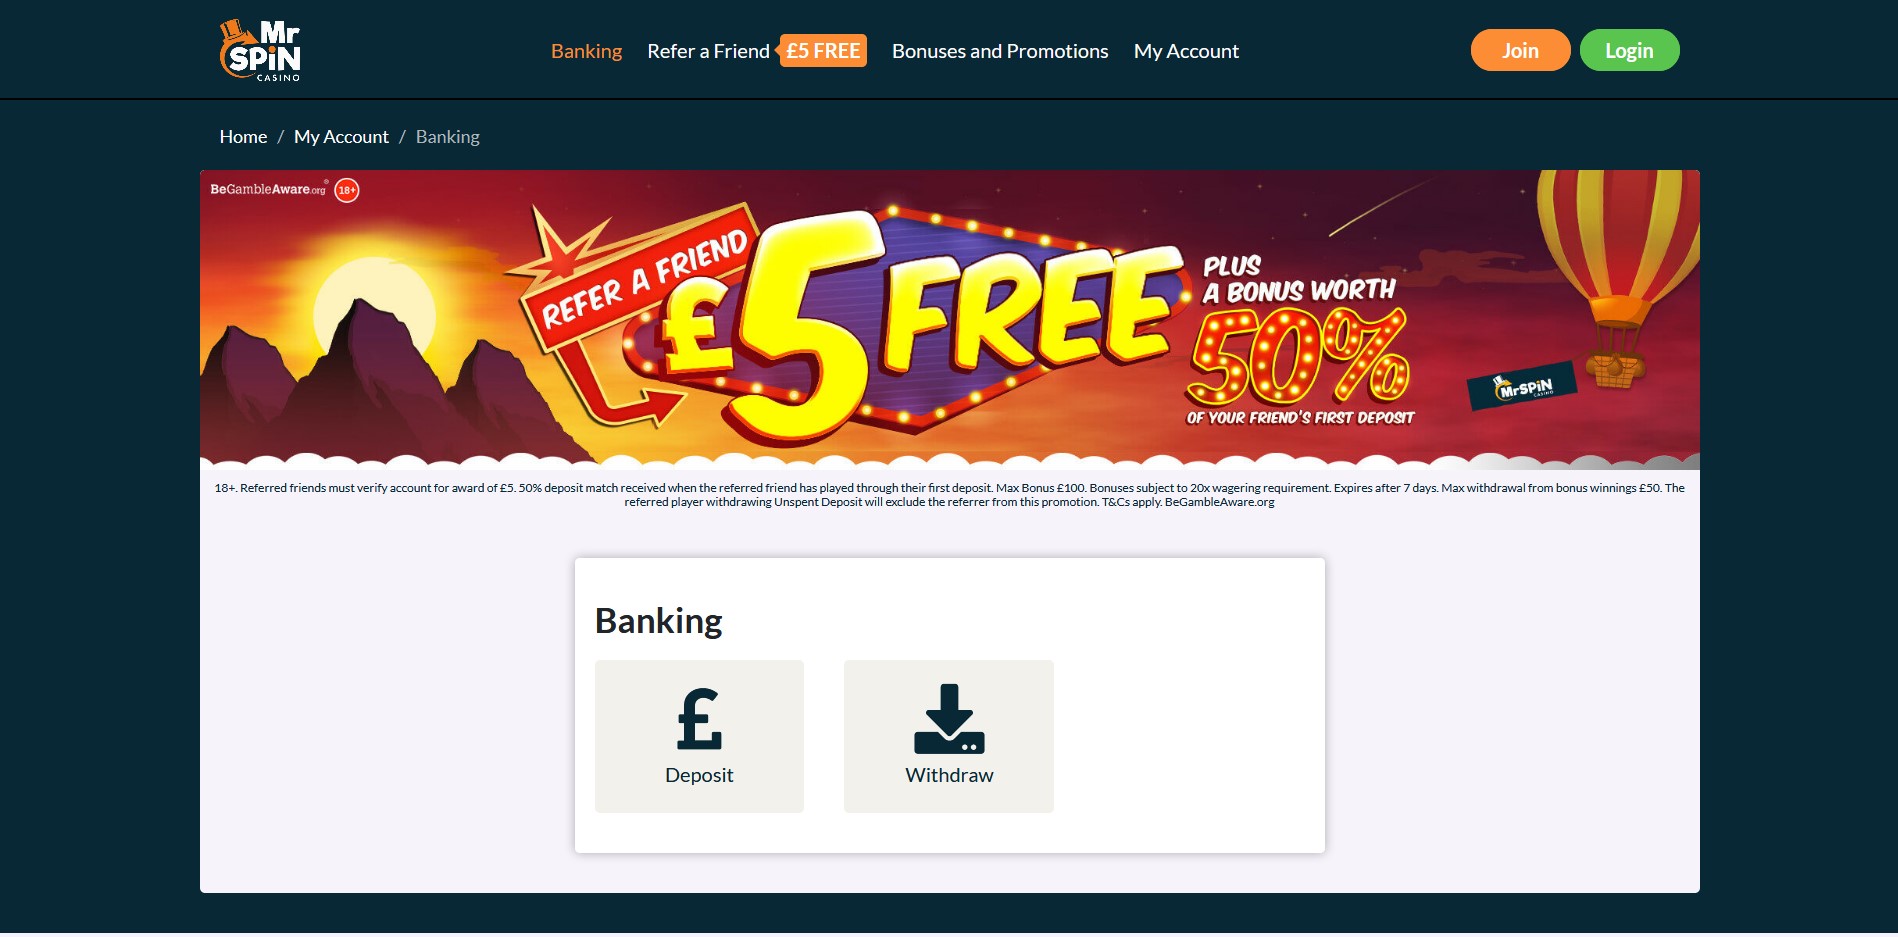 Mr Spin Casino UK Payment Methods